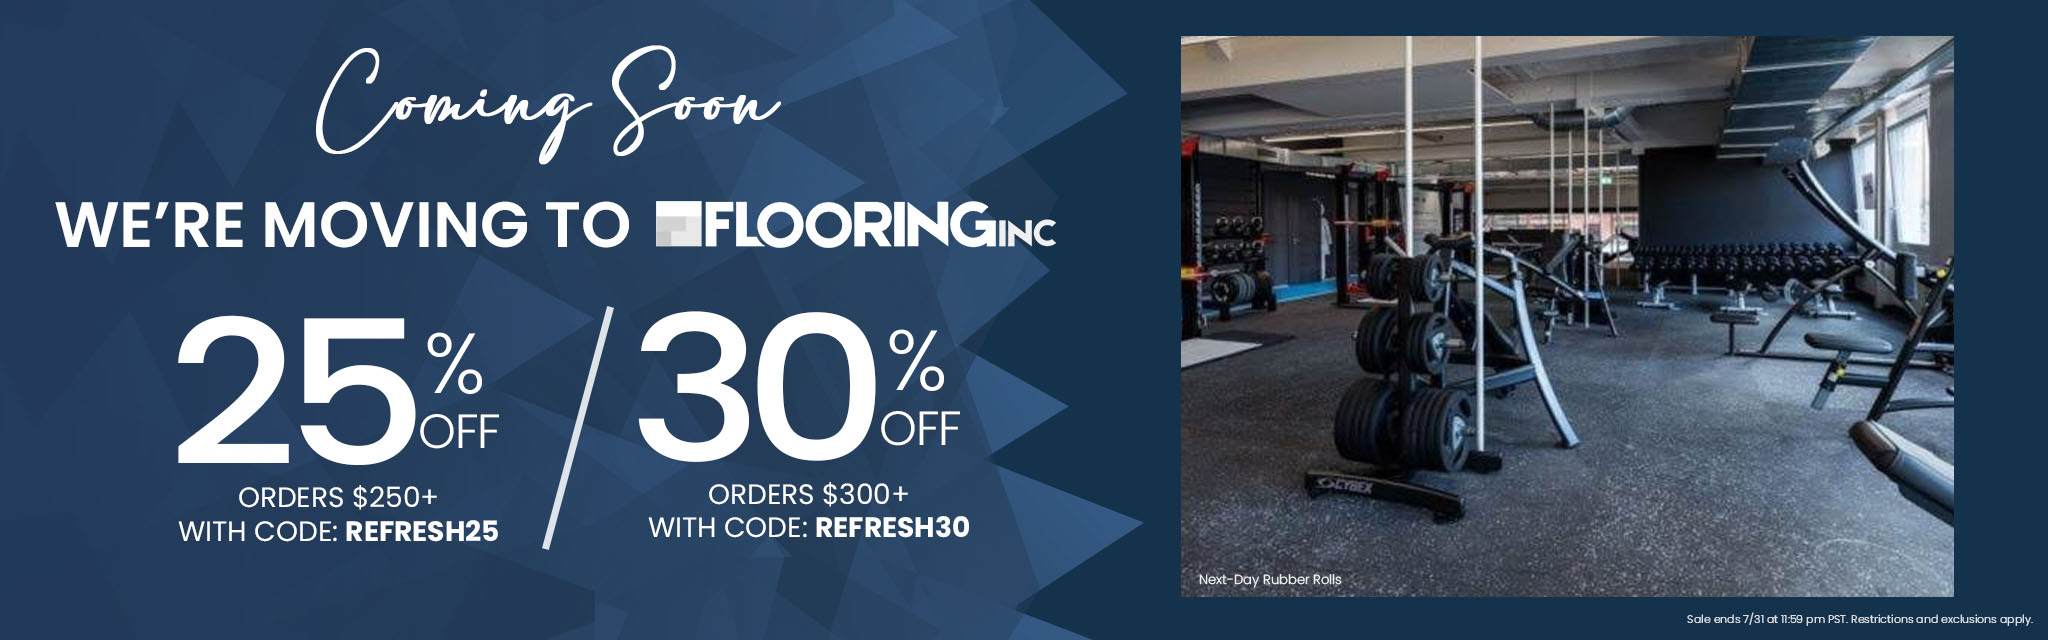 Coming Soon. We're Moving to Flooring Inc. 25% Off Orders $250 or more with code: REFERSH25 or 30% Off Orders $300 or more with code: REFRESH30. Sale ends 7/31 at 11:59pm PST. Restrictions and exclusions apply. 